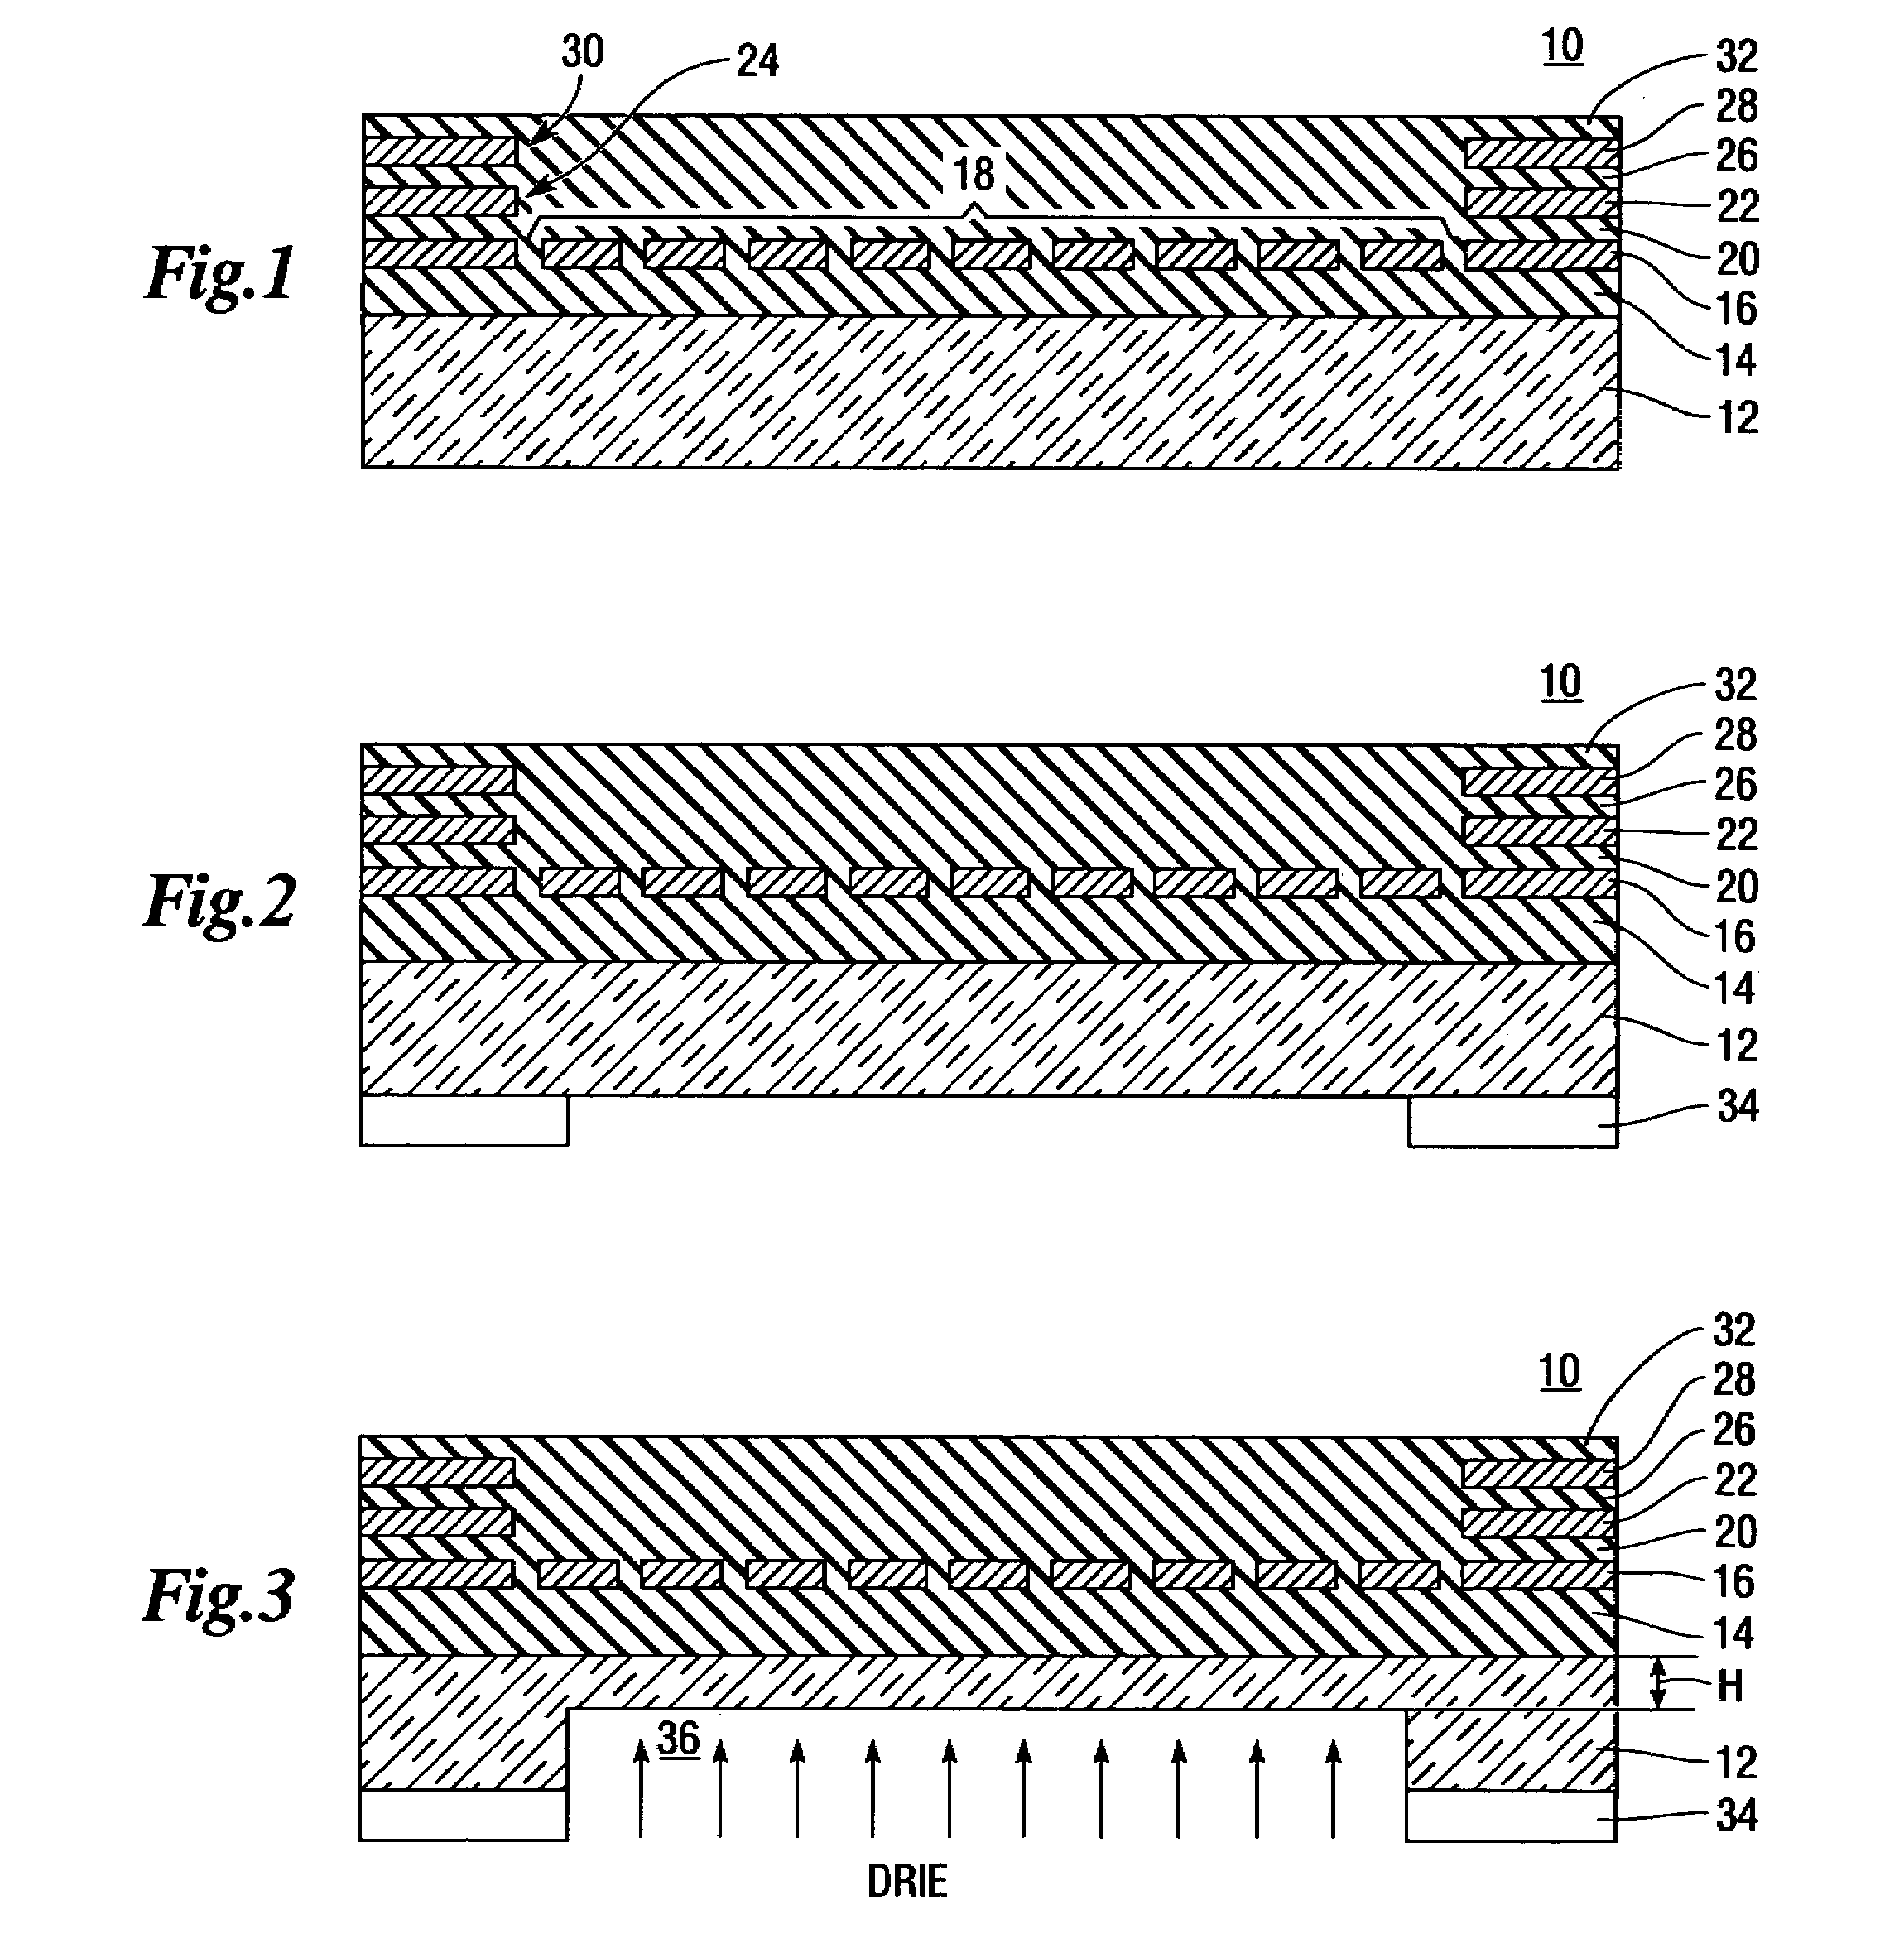 Process for forming and acoustically connecting structures on a substrate